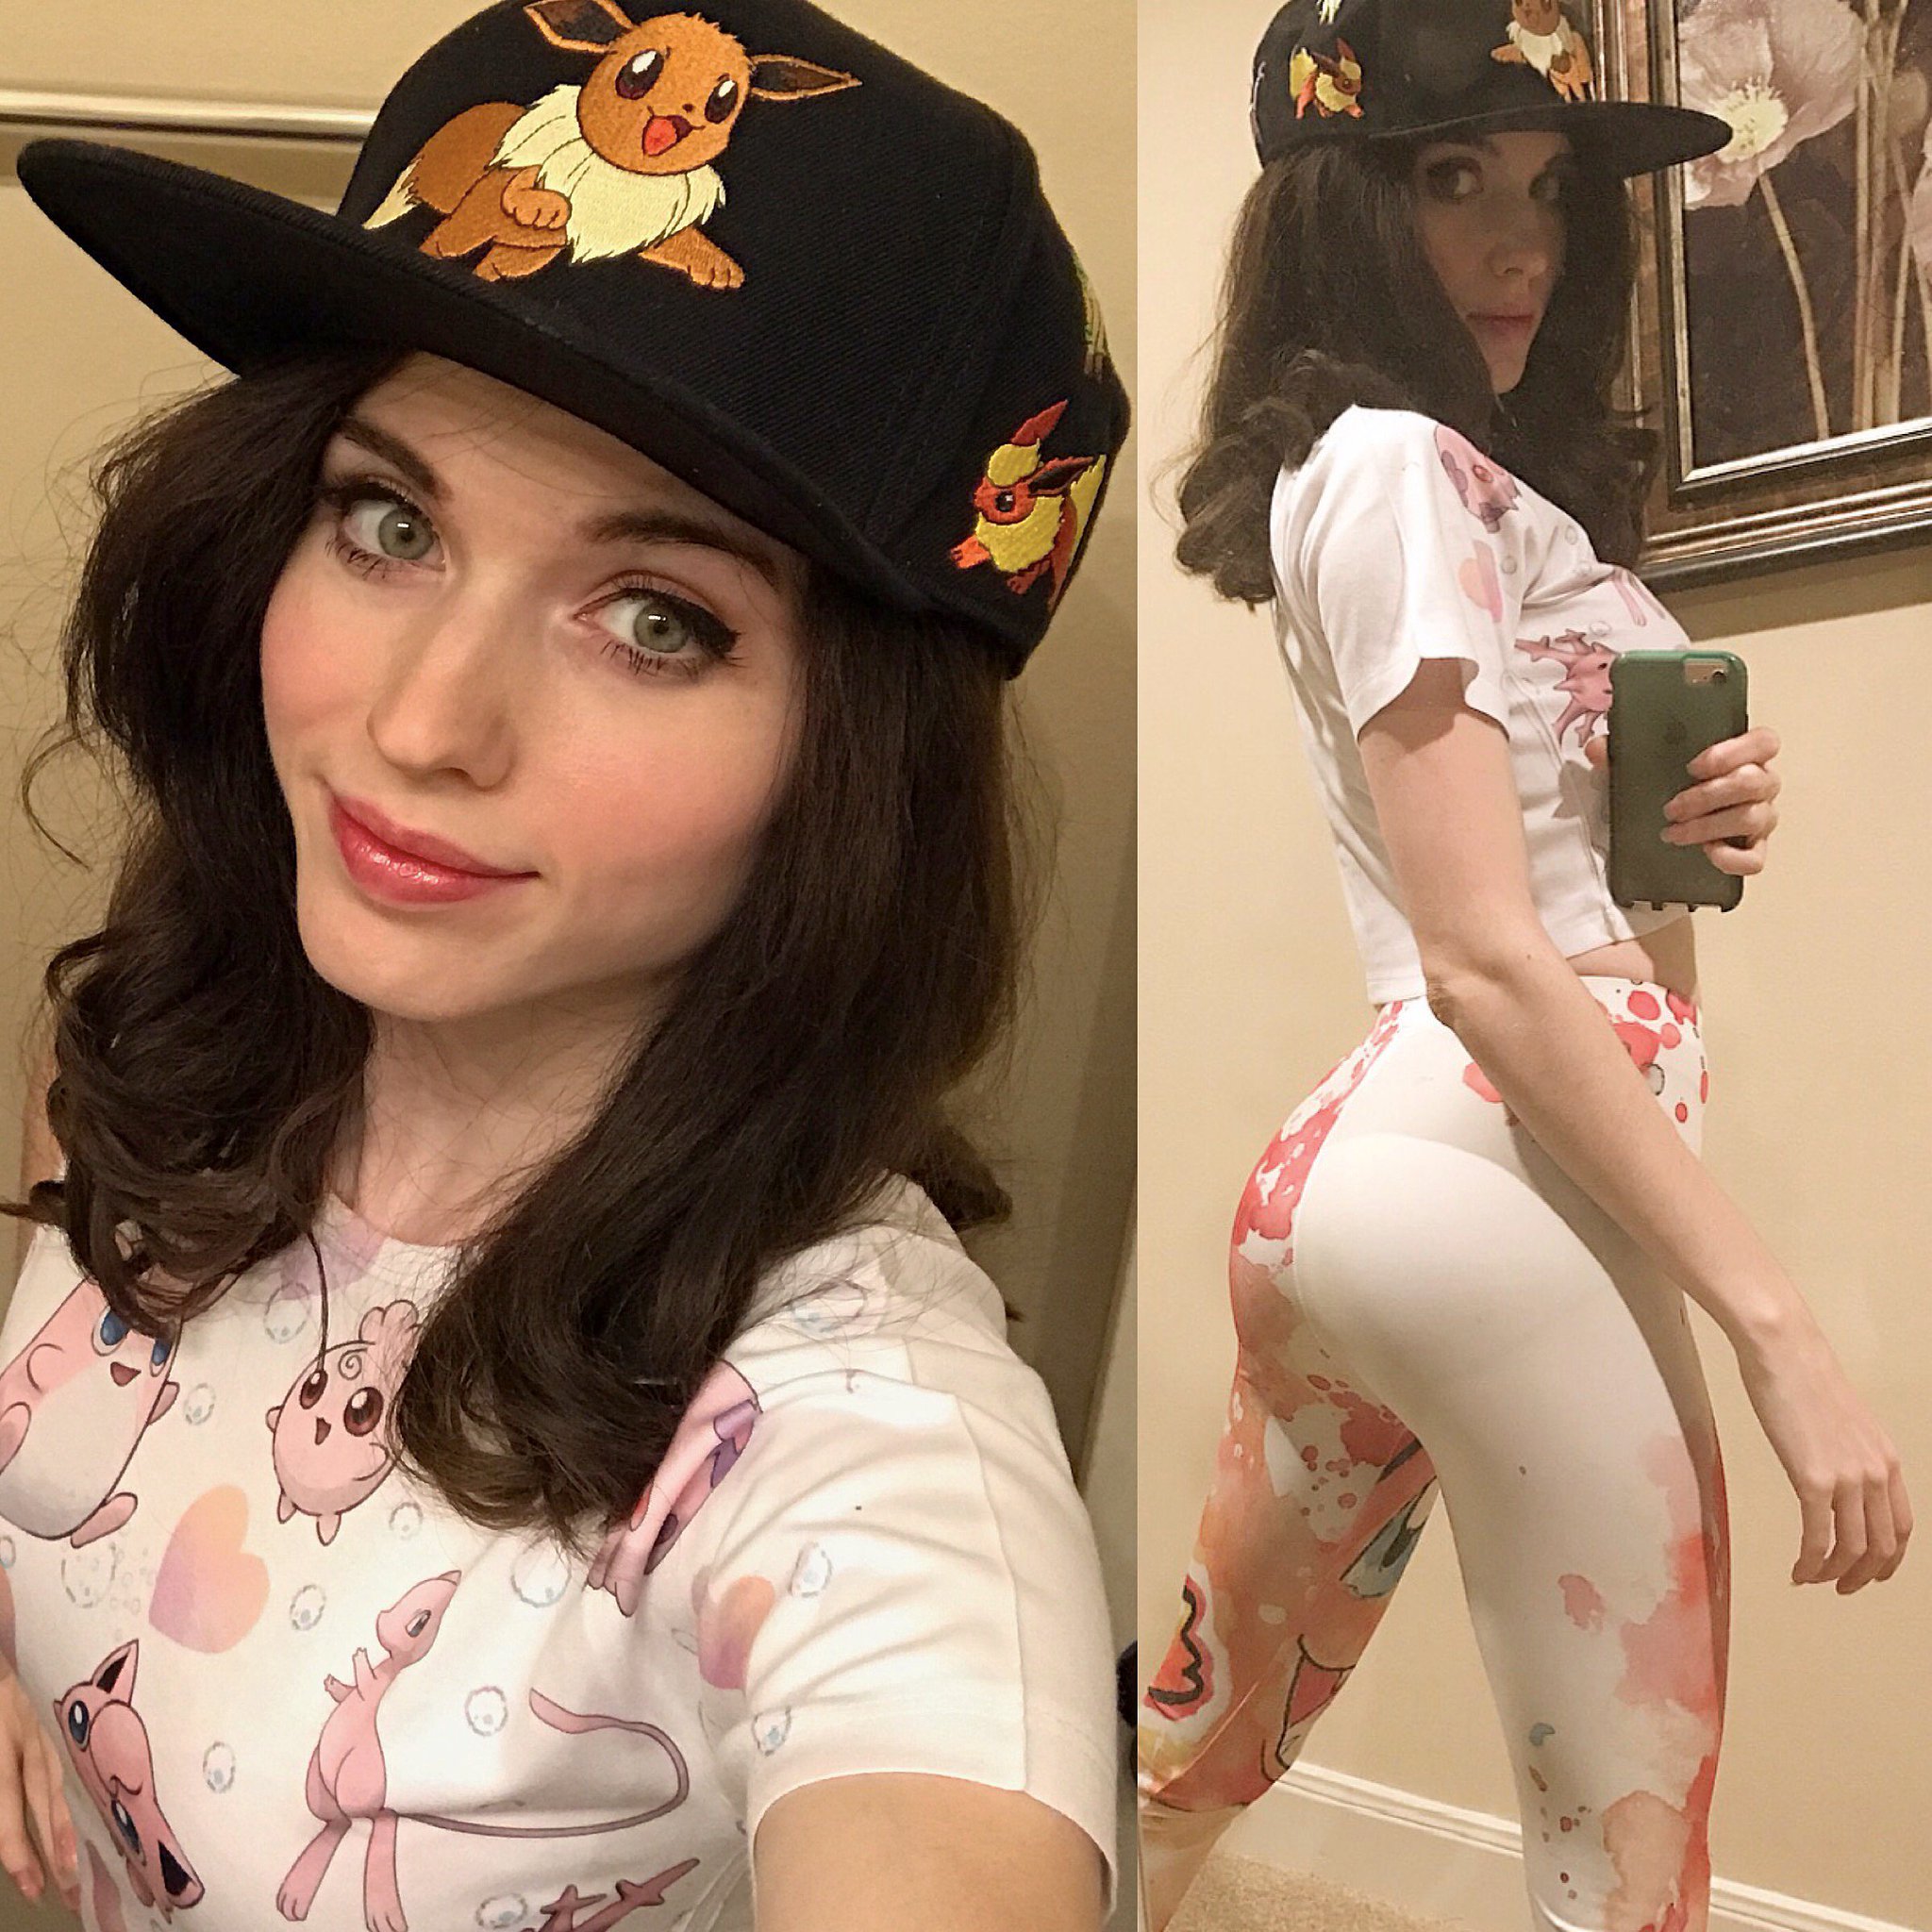 Amouranth on Twitter.